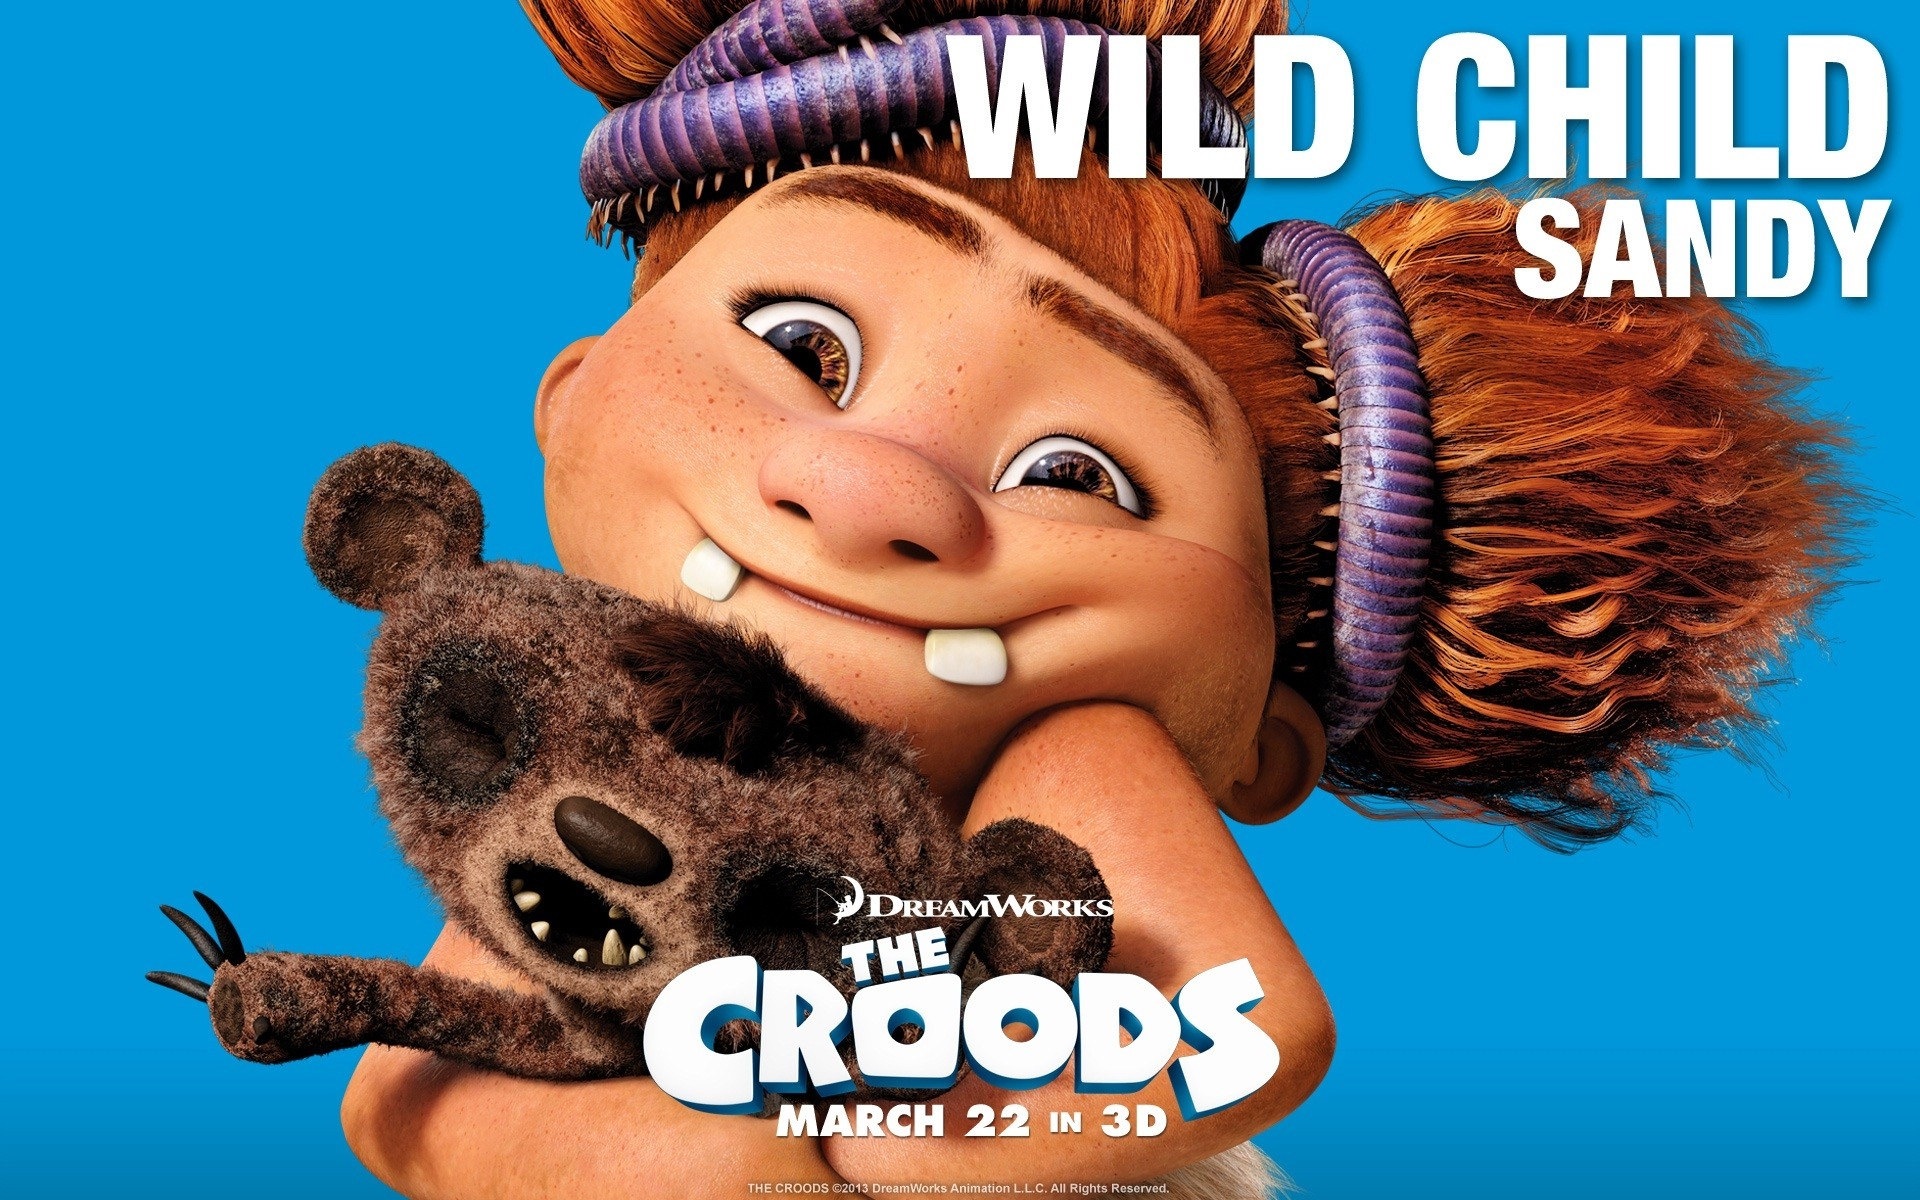 The Croods HD movie wallpapers #9 - 1920x1200